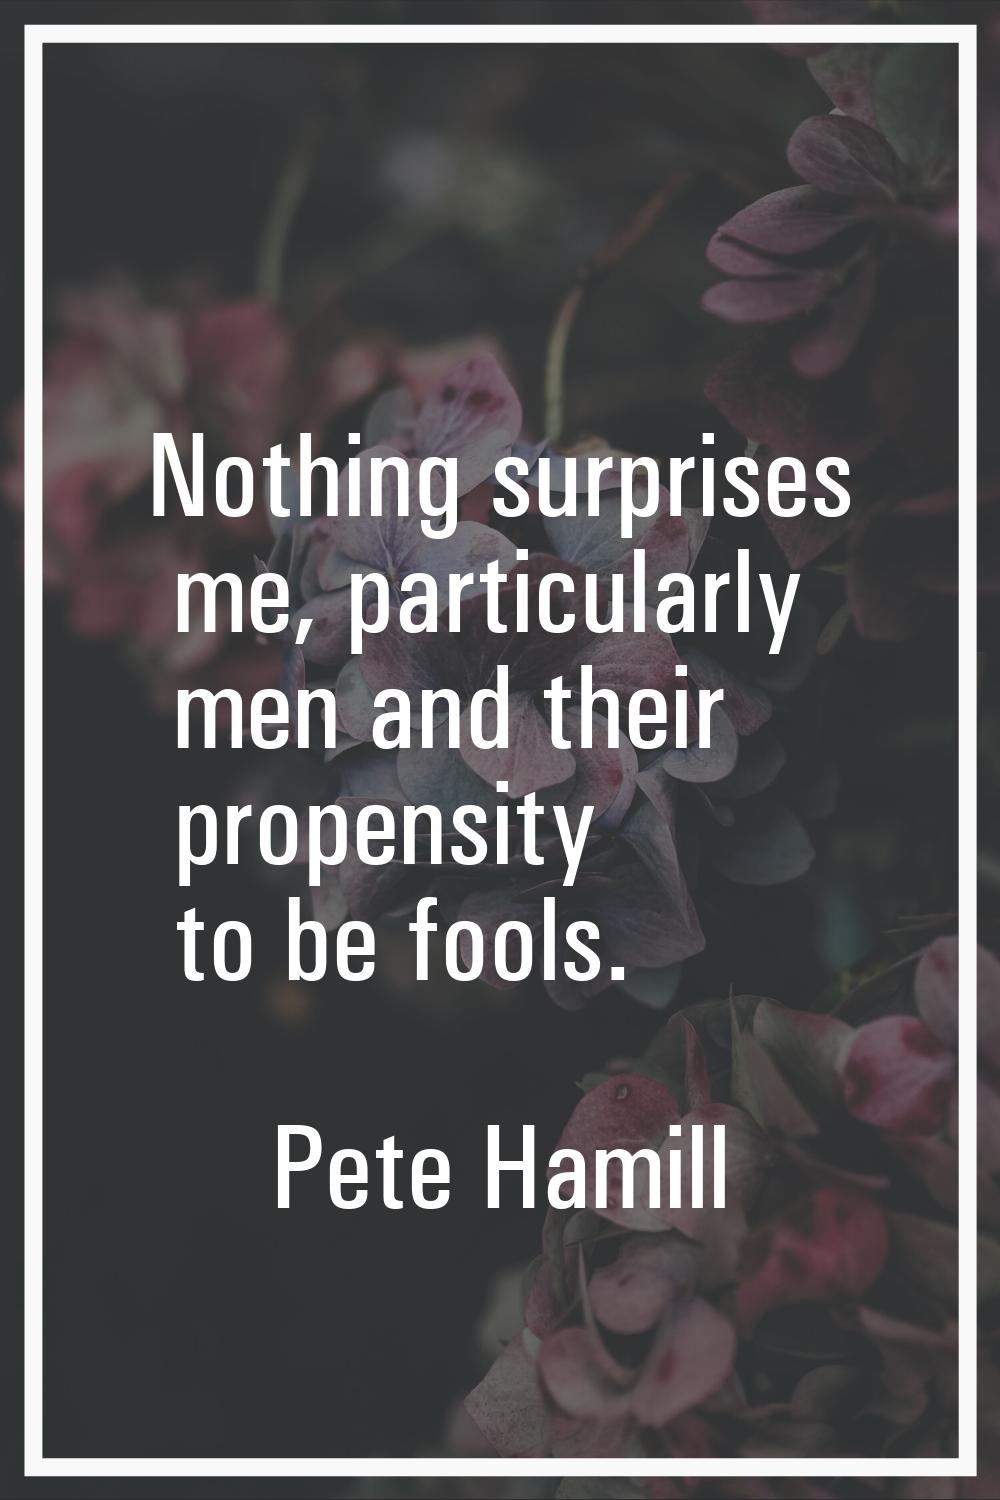 Nothing surprises me, particularly men and their propensity to be fools.